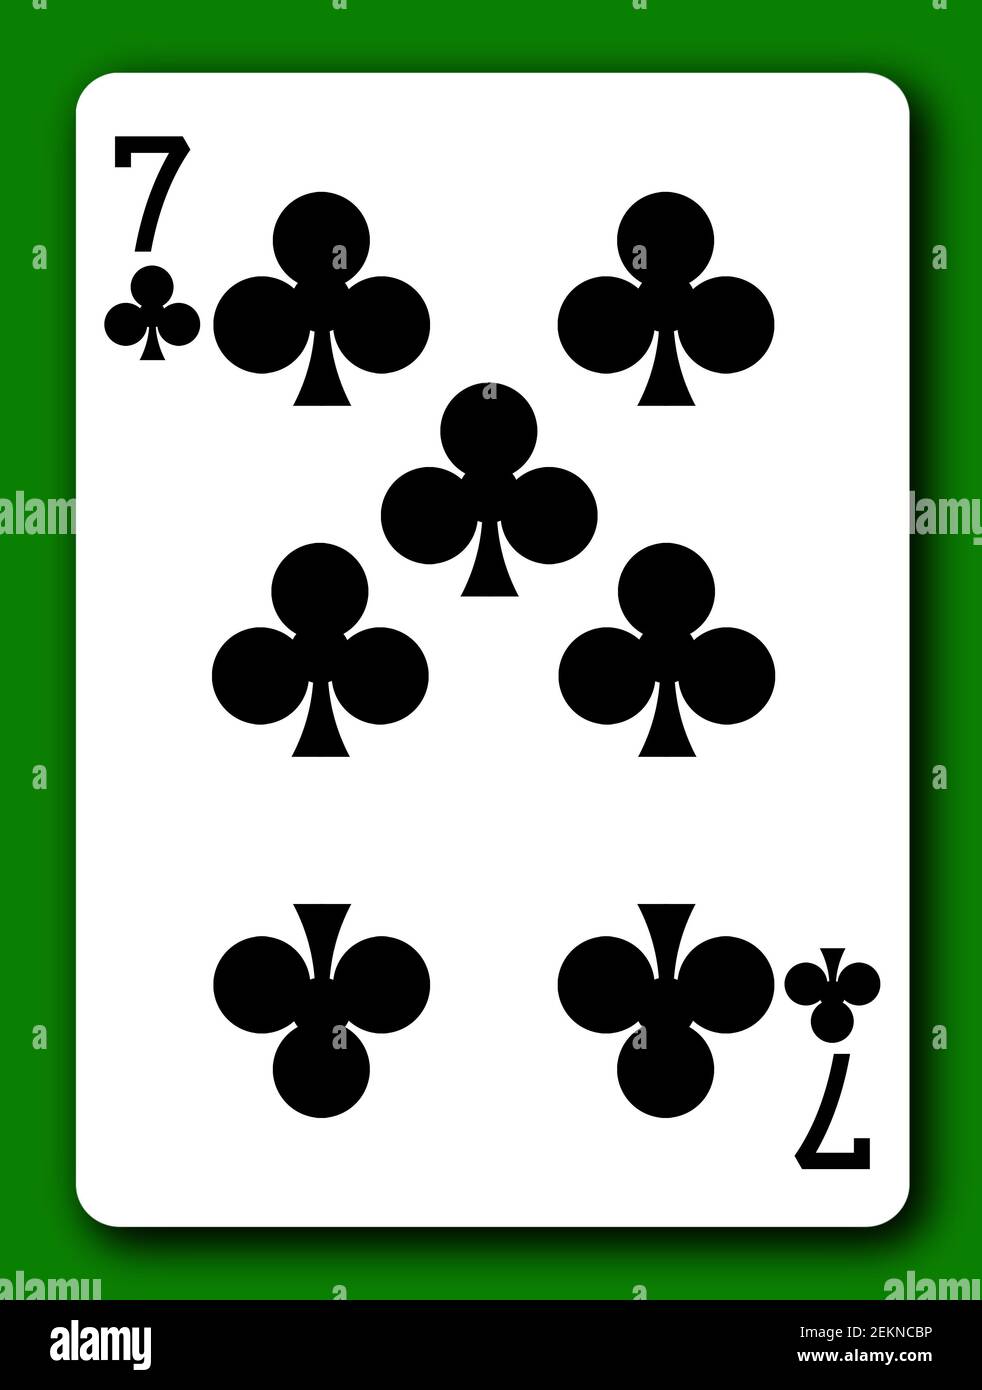 7 Seven of Clubs playing card with clipping path to remove background and shadow 3d illustration Stock Photo